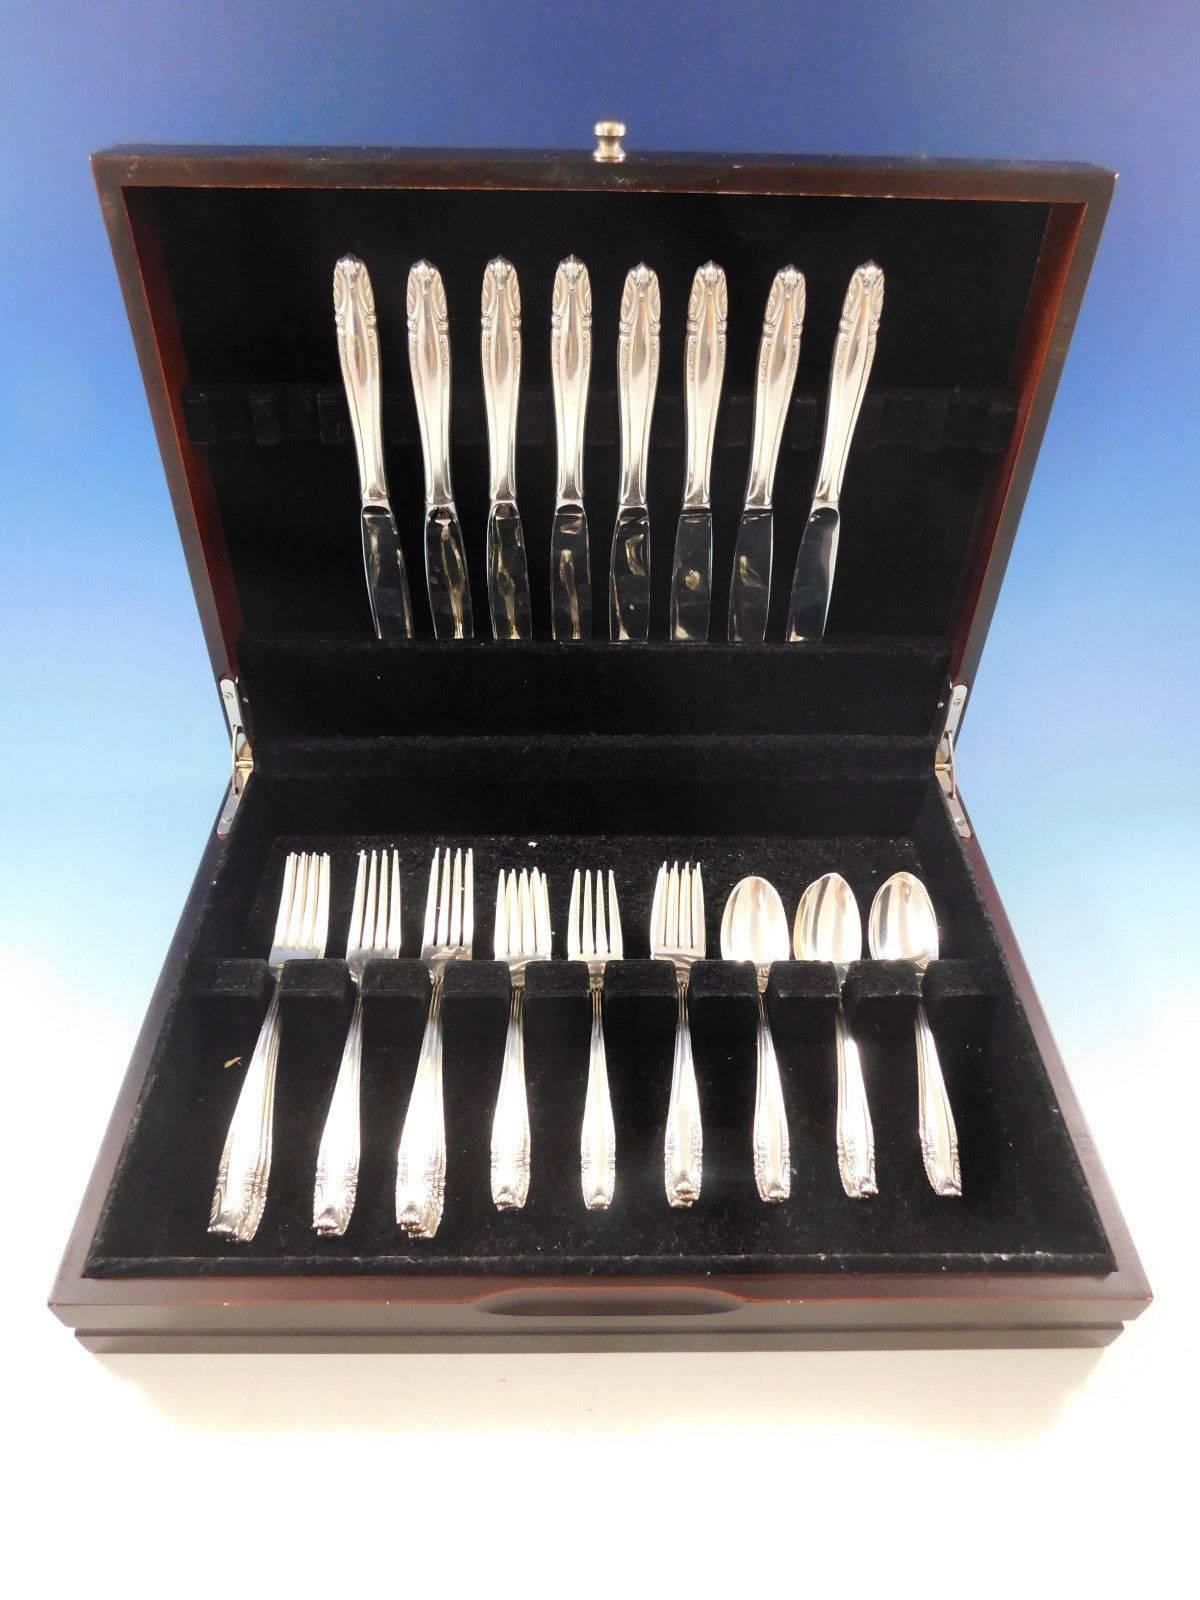 Stradivari by Wallace sterling silver flatware set, 32 pieces. This set includes:

8 Knives, 9